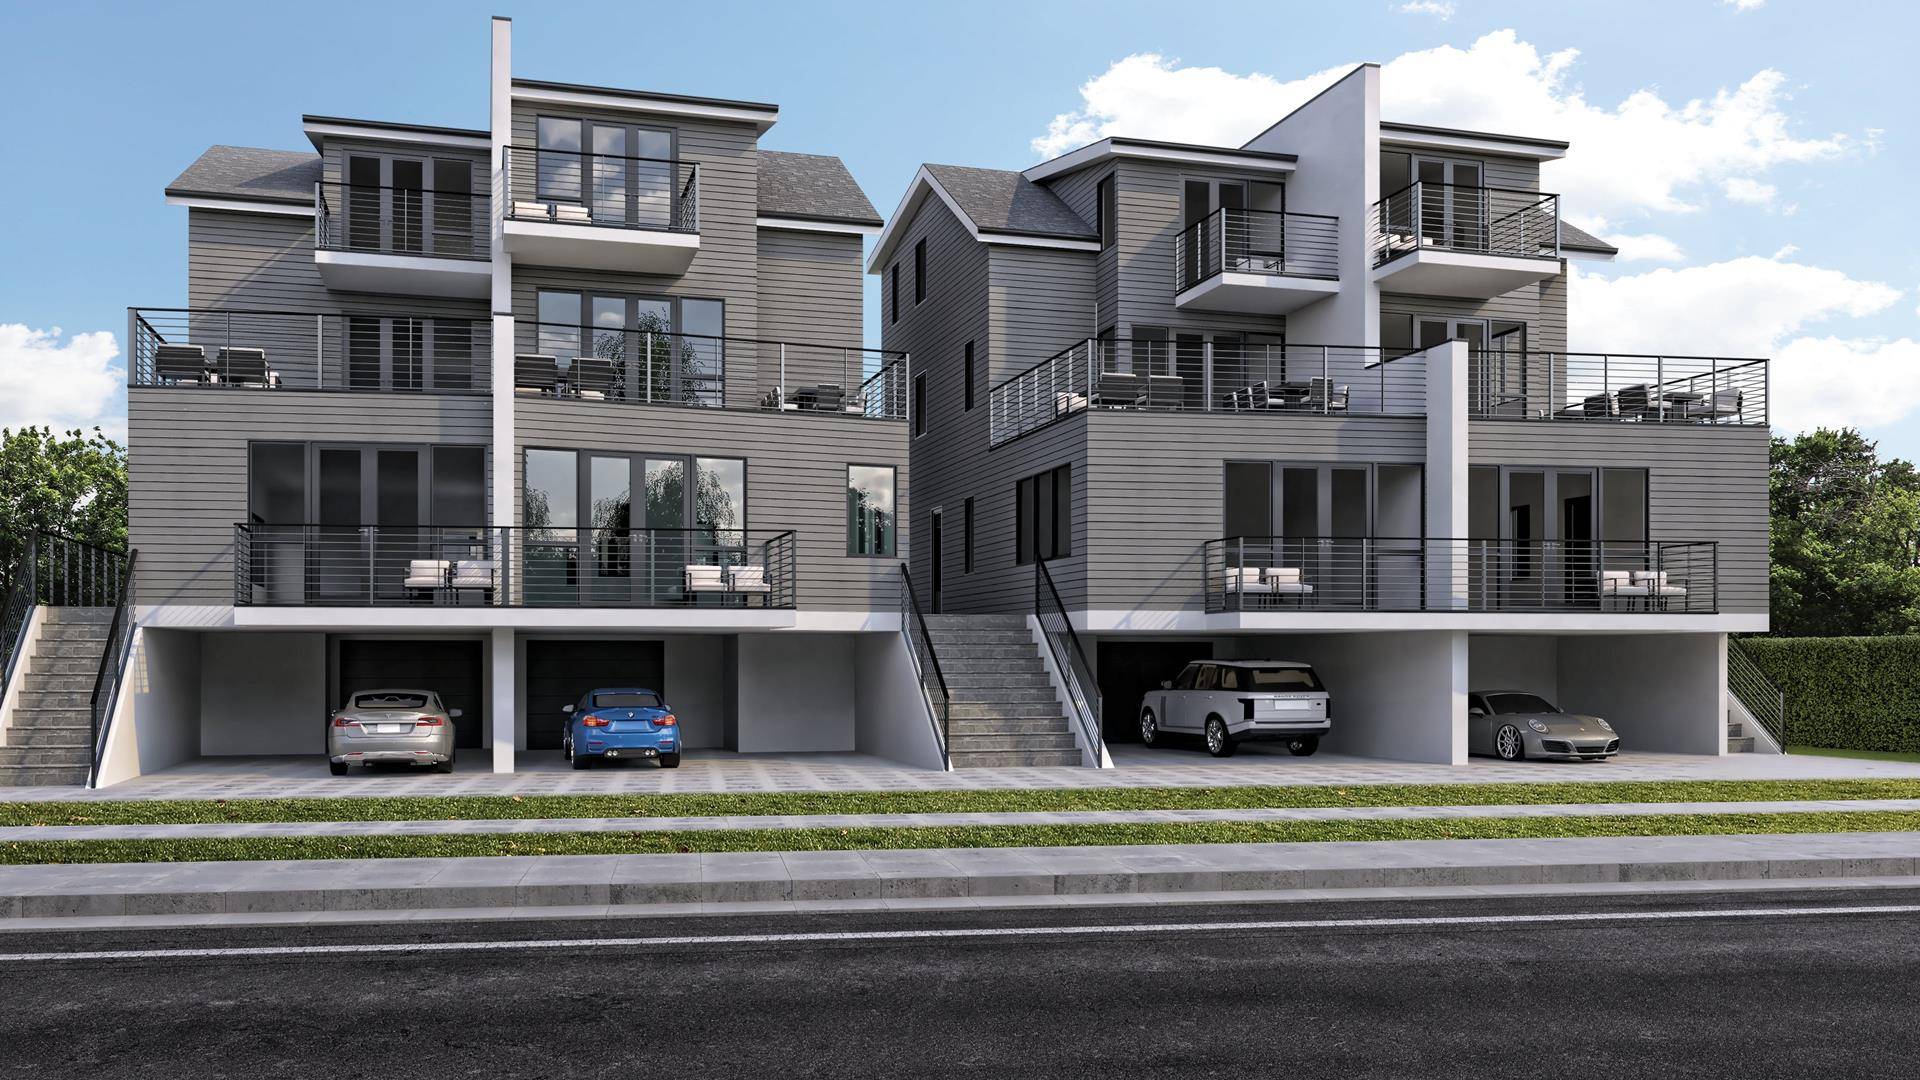 Welcome to Rockaways newest bayfront townhome development in the heart of this beach community.